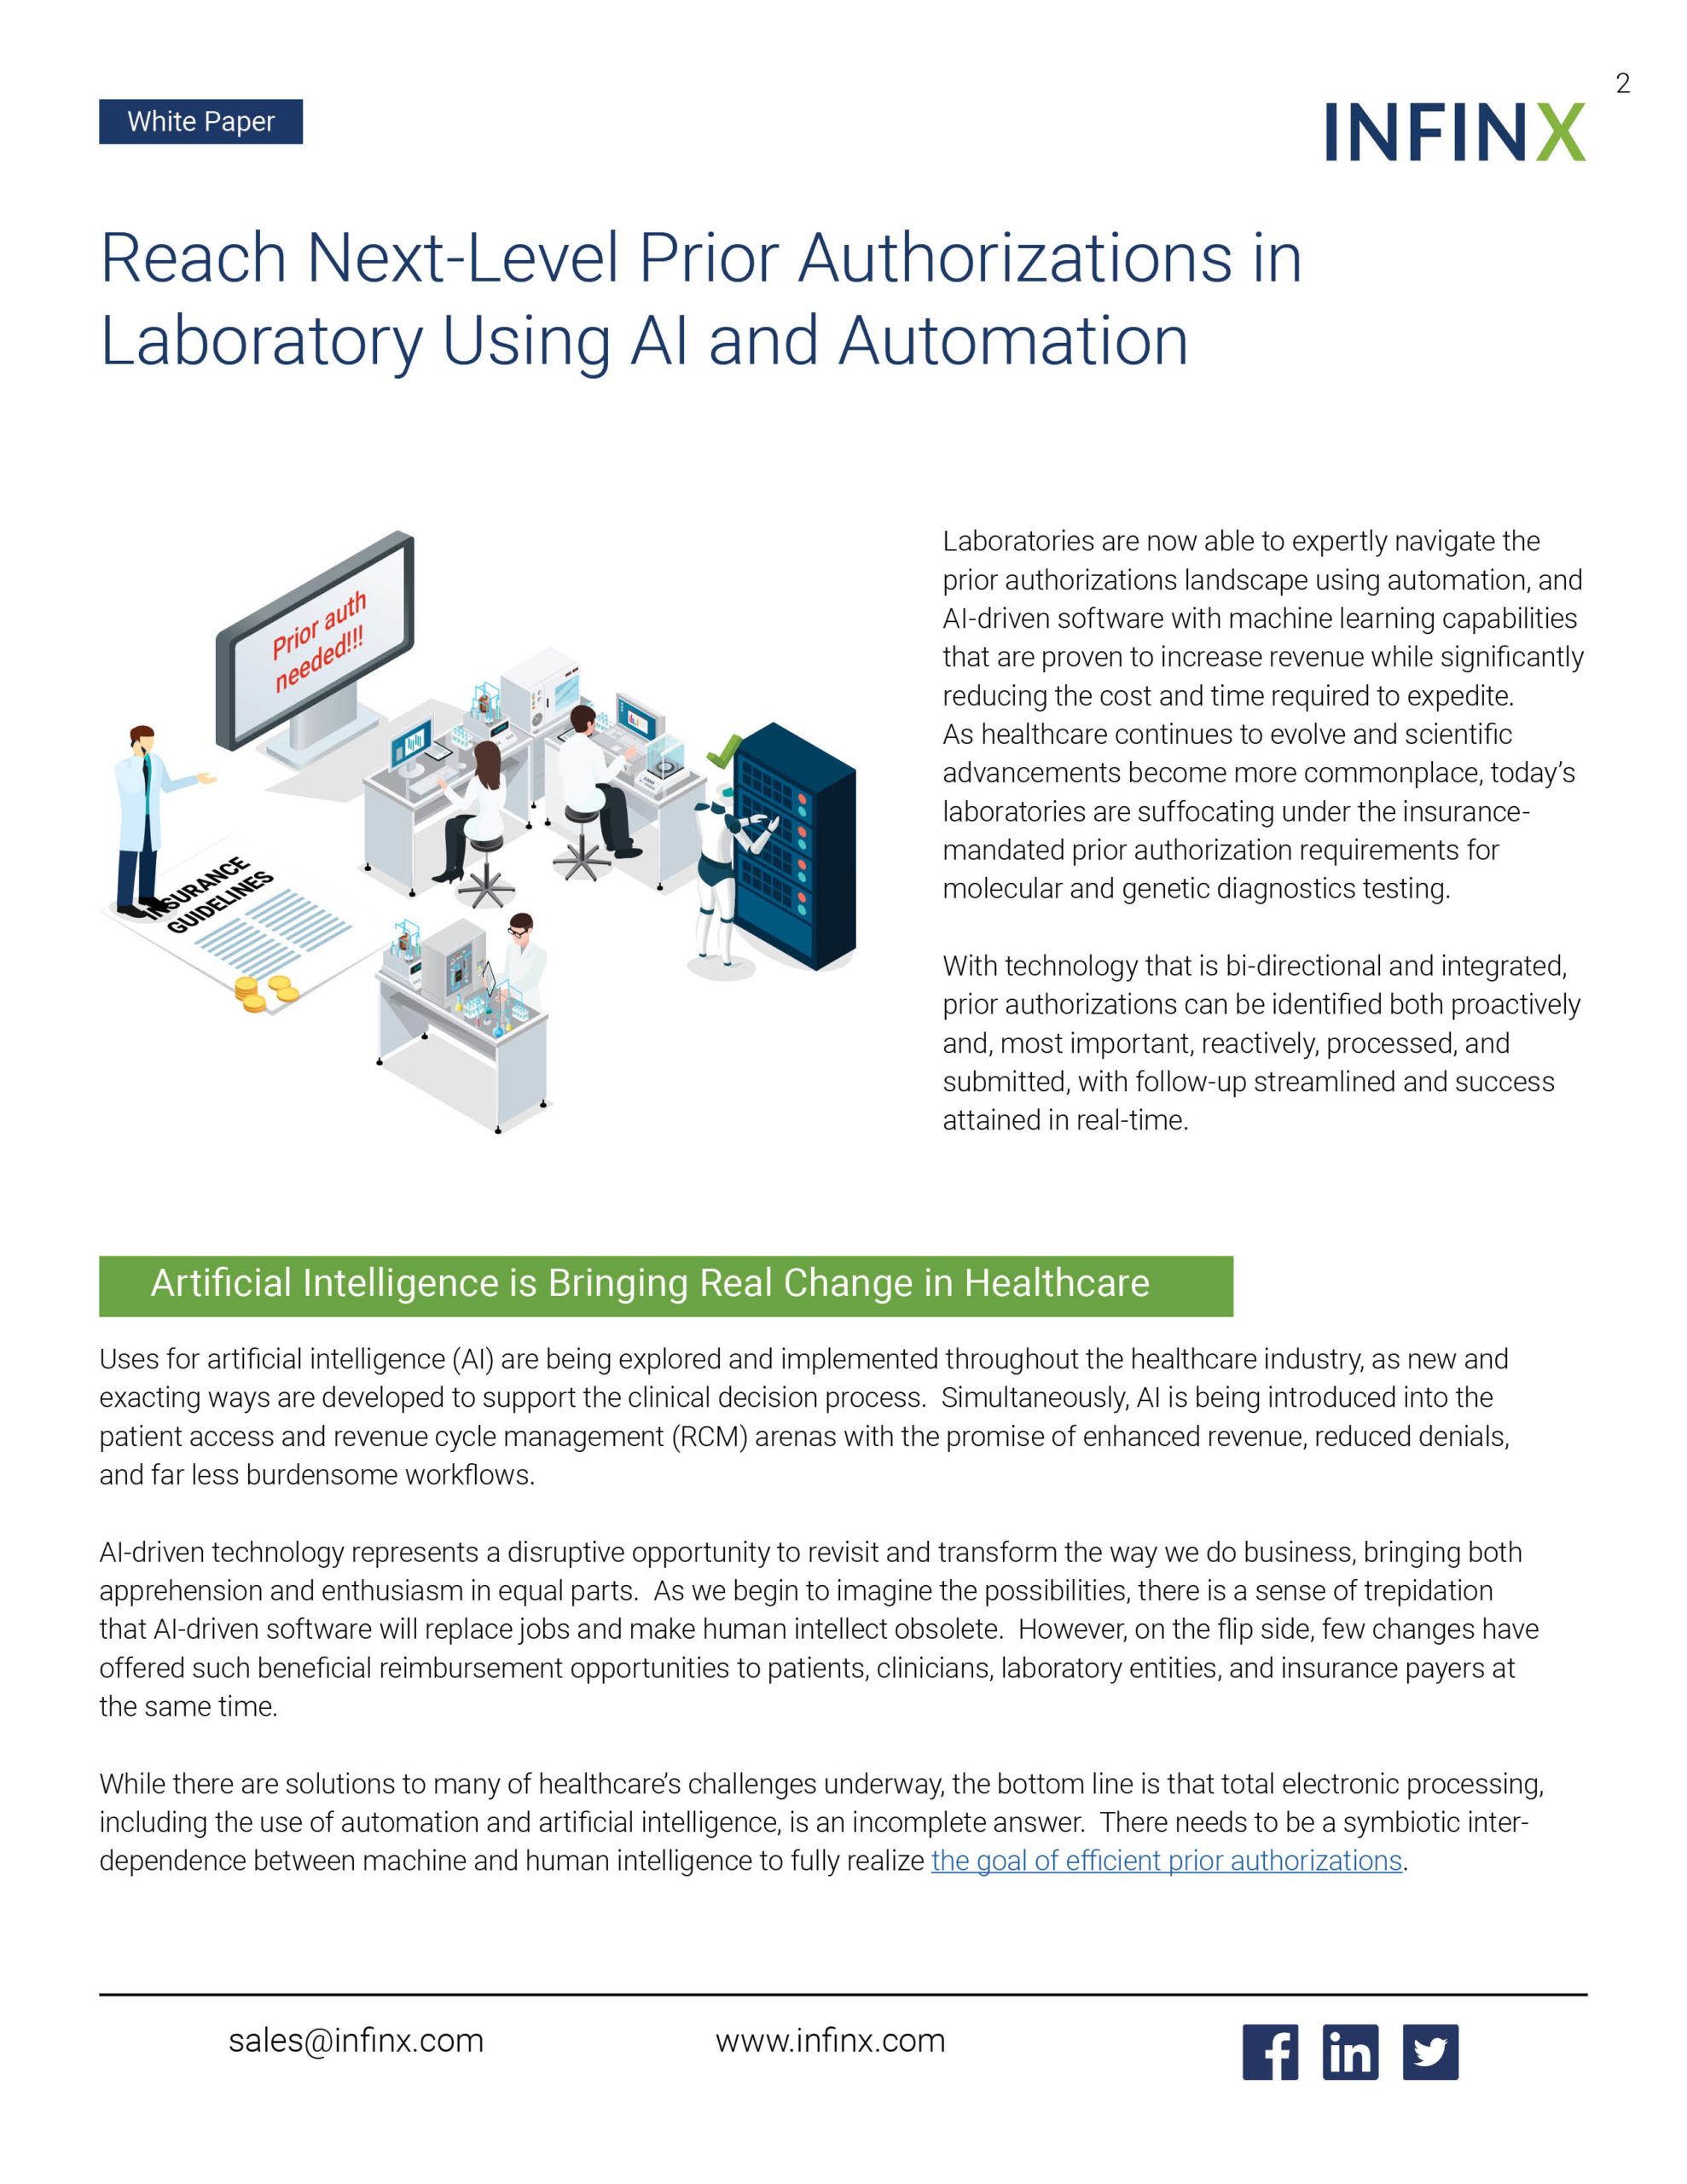 Infinx - White Paper - Reach Next-Level Prior Authorizations in Laboratory Using AI and Automation June2021 2